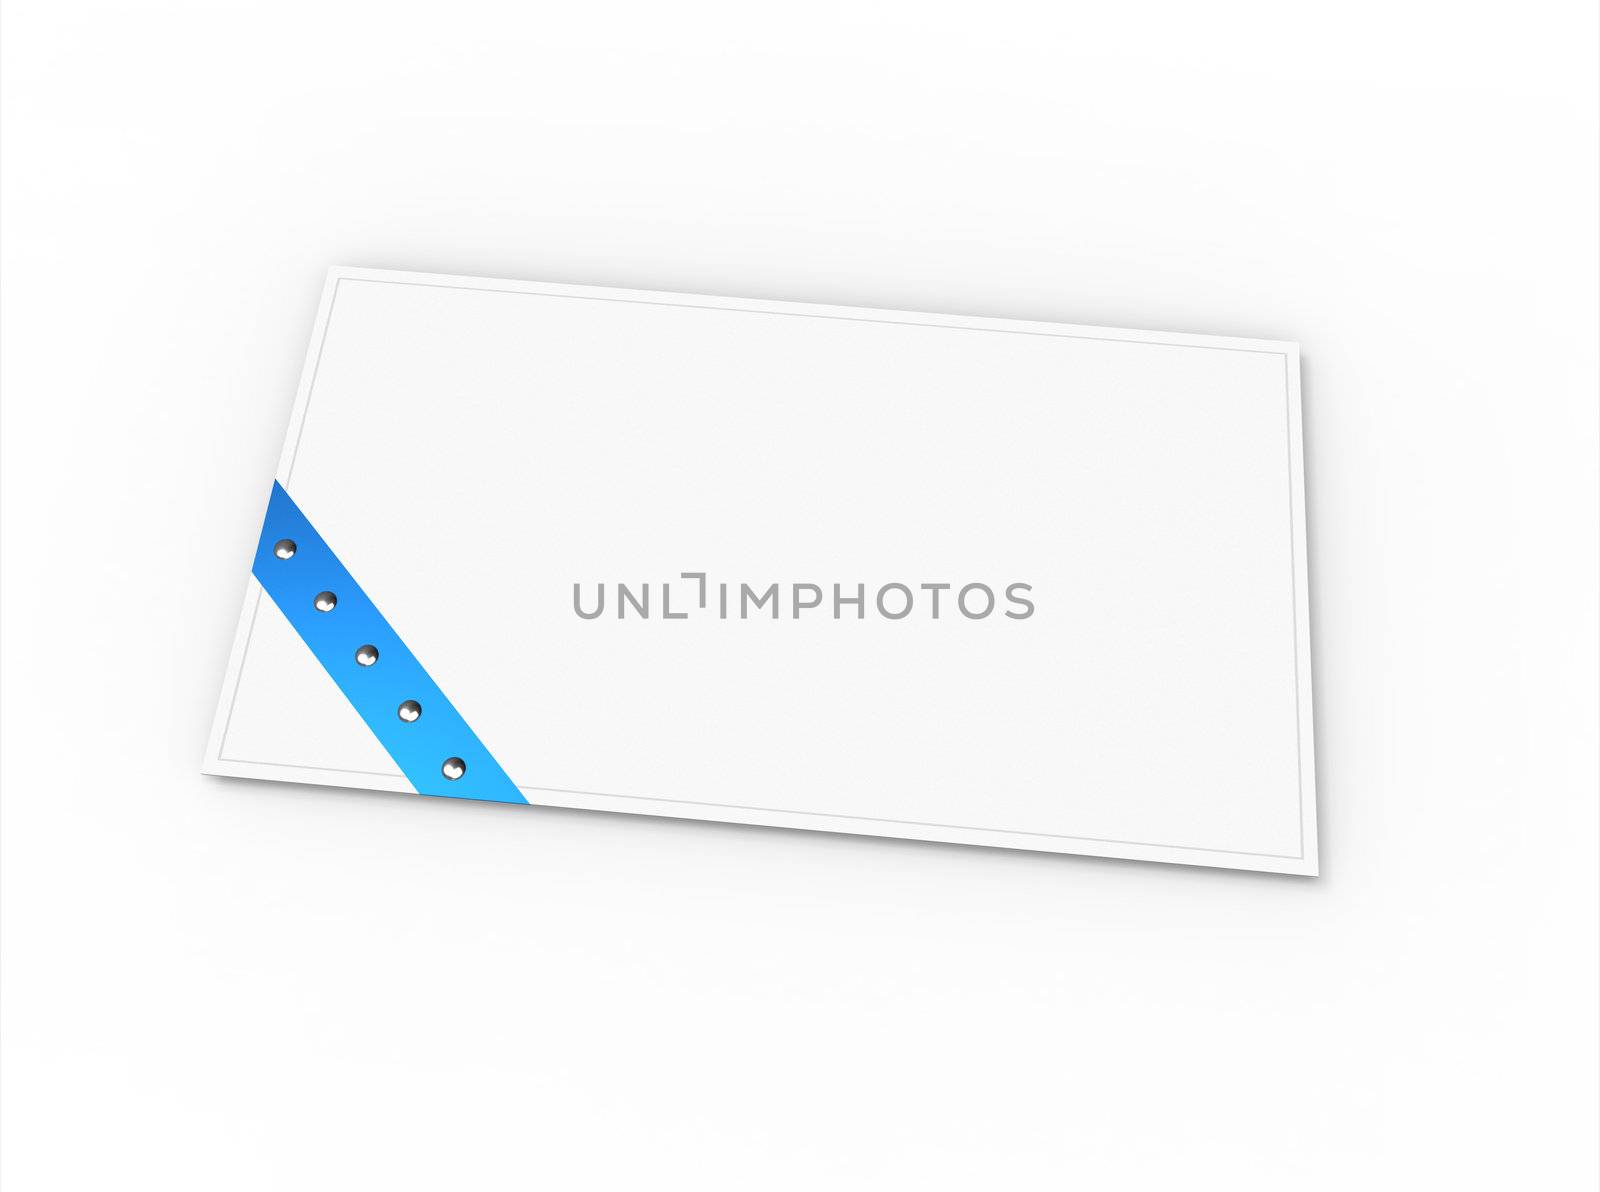 Blank greeting card (for greeting or congratulation) with blue ribbon